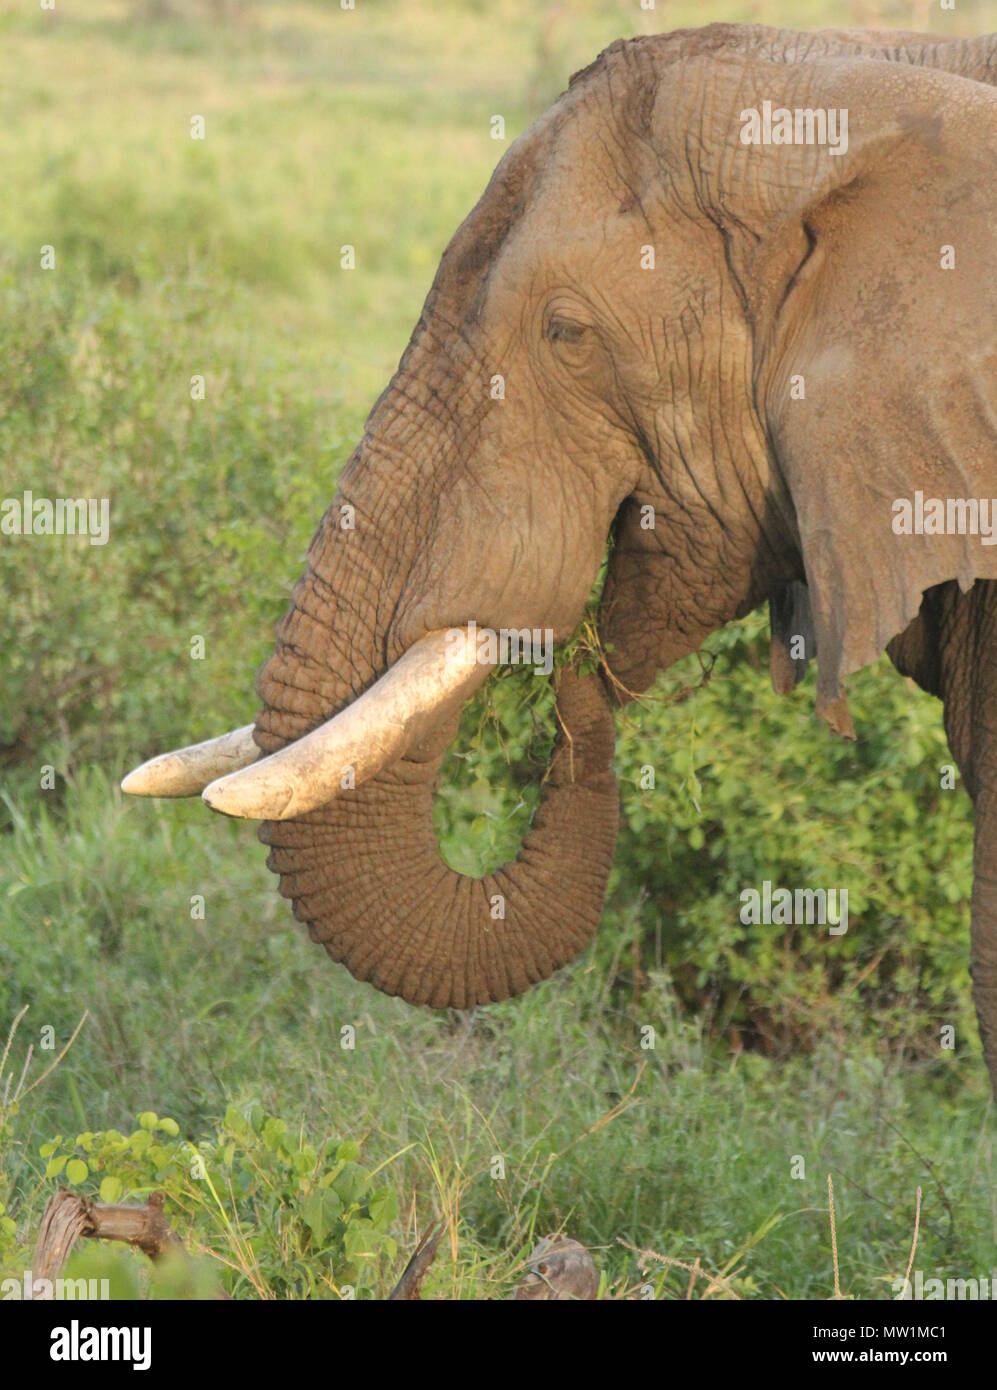 Elephant eating leafs and sticks Stock Photo